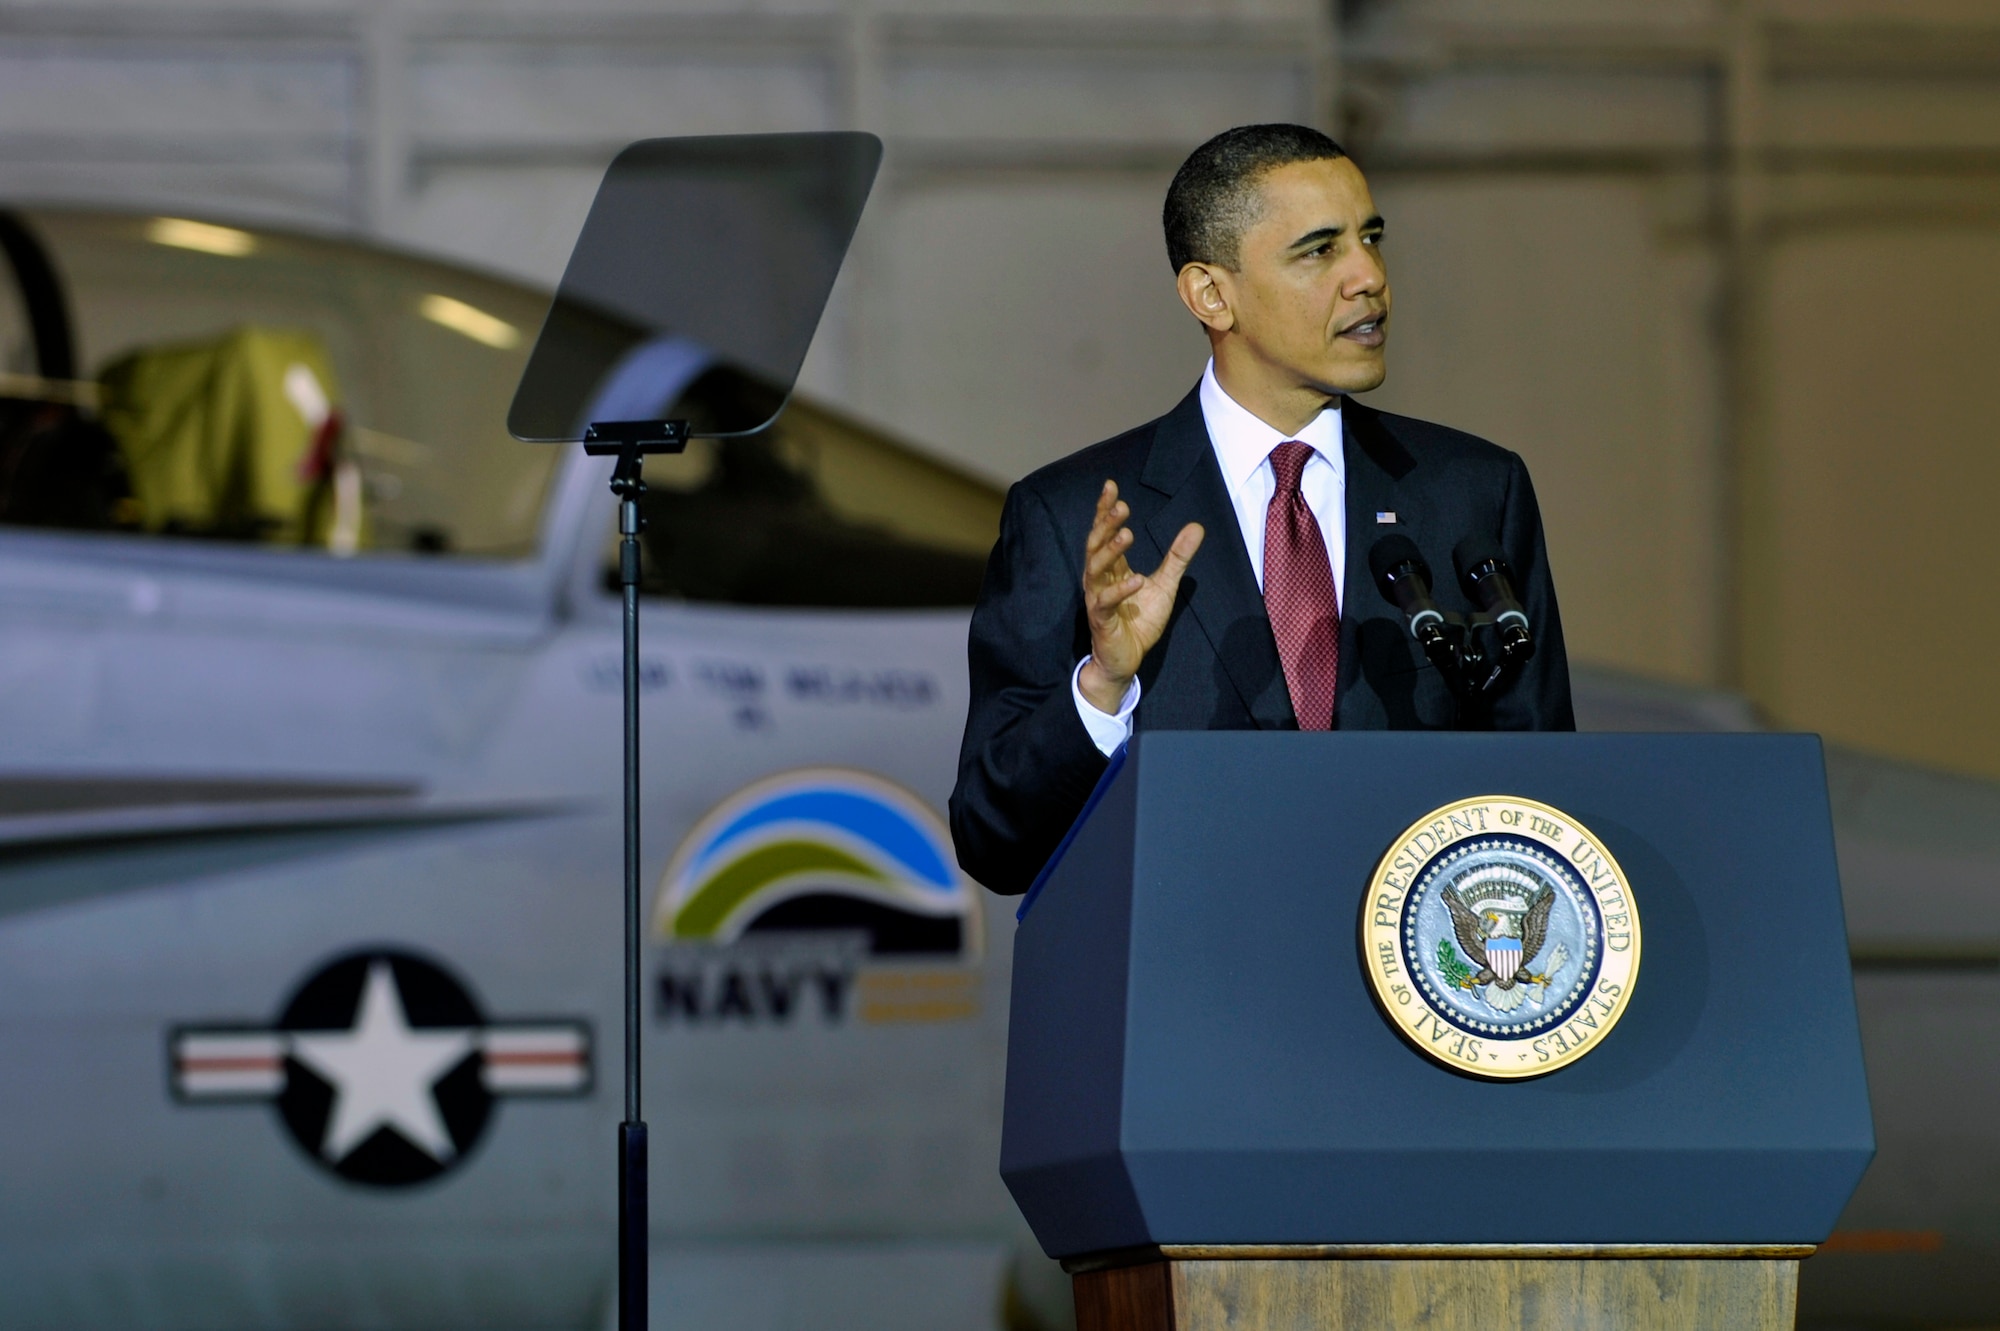 President Barack Obama speaks to military and civilian personnel about his plan to lift the nearly 20 year executive ban on oil and natural gas drilling off the Atlantic Ocean and Gulf of Mexico, March 31, at Joint Base Andrews, Md. President Obama also announced the Navy F/A-18F Super Hornet, dubbed "The Green Hornet," is slated to be tested on Earth Day, April 22. If the test is successful, it will be the first fighter to reach supersonic speed with a 50/50 blend of Hydrotreated Renewable Jet and JP-8 fuel. (U.S. Air Force photo by Airman 1st Class Perry Aston)